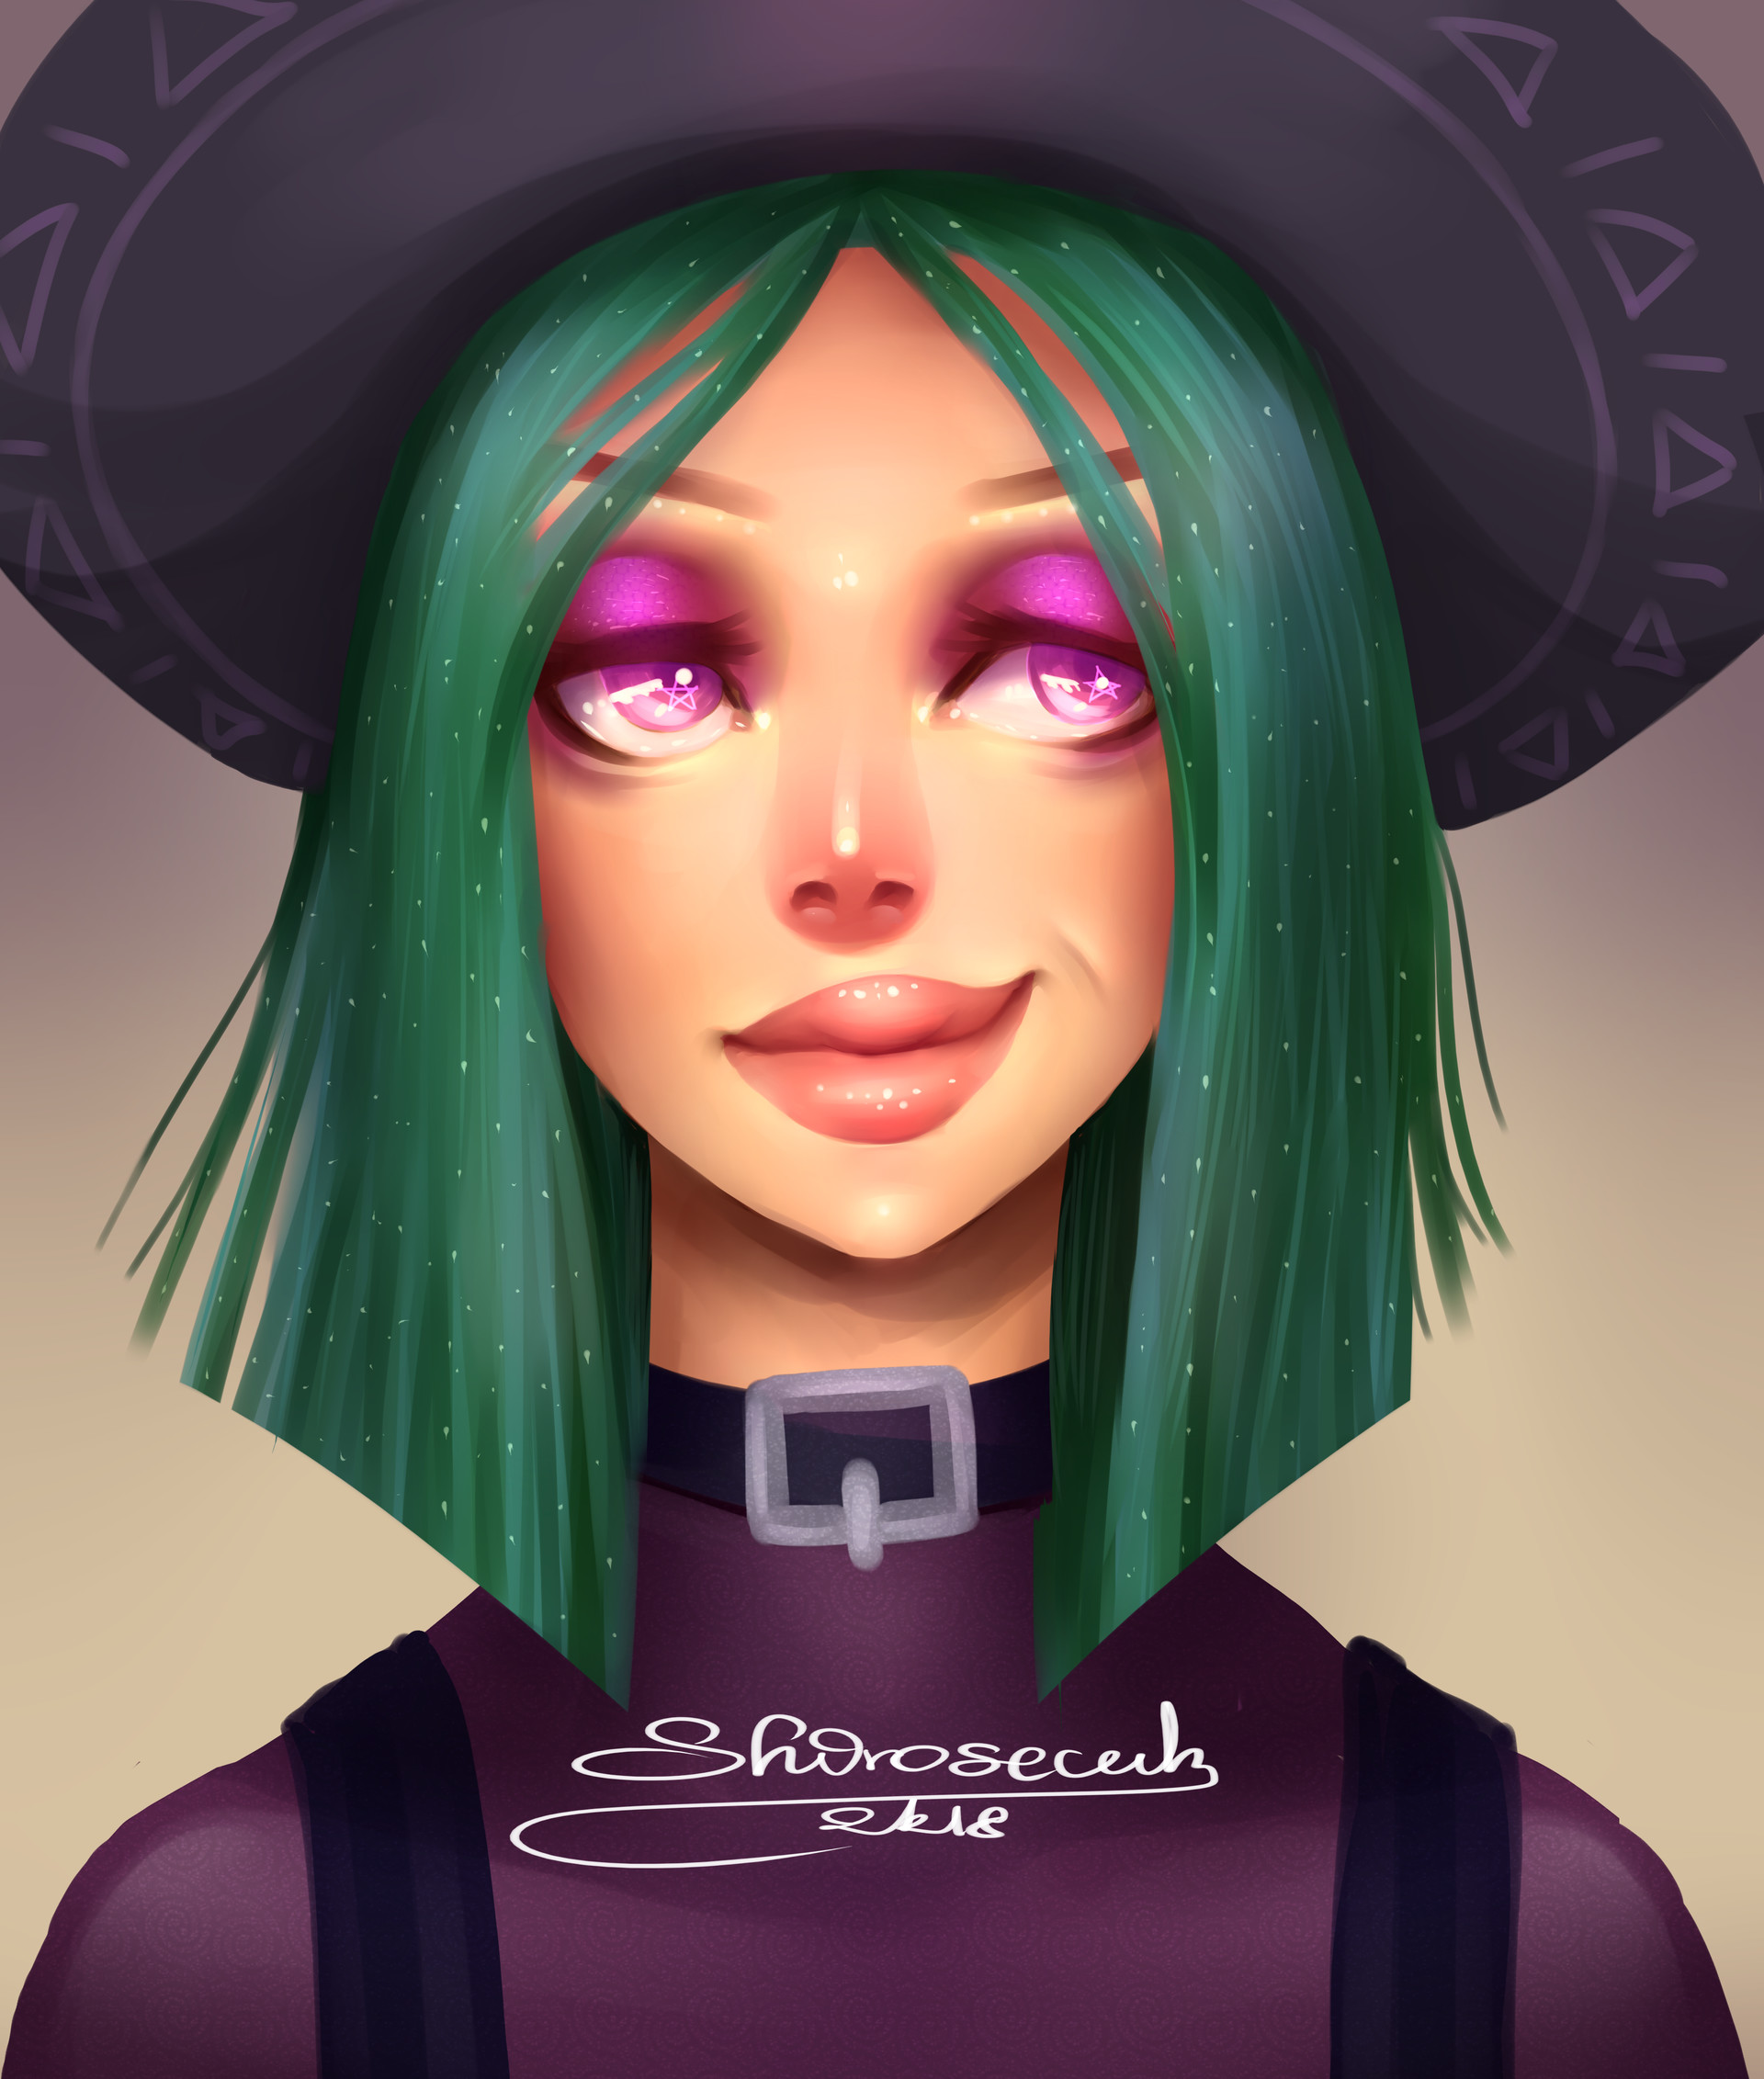 ArtStation - Witch's yearbook picture.